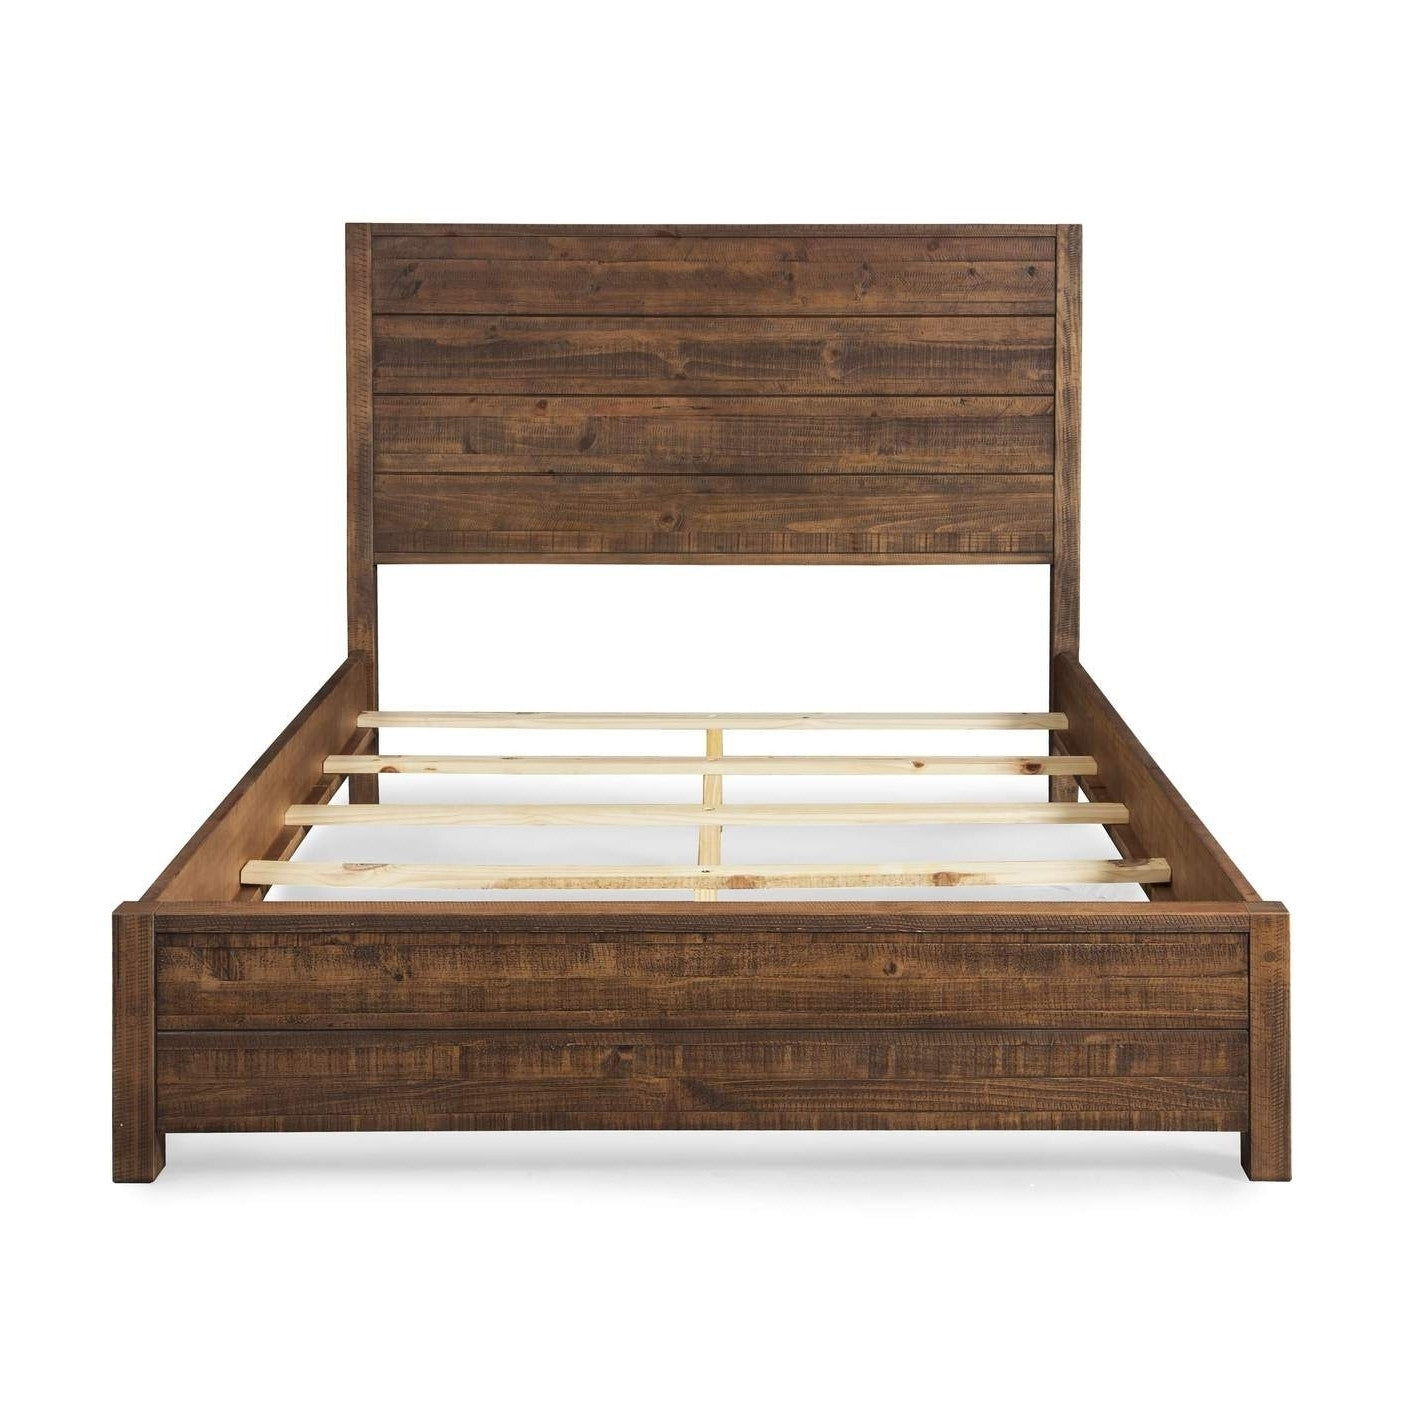 FarmHome Walnut Solid Pine Platform Bed in Queen Size